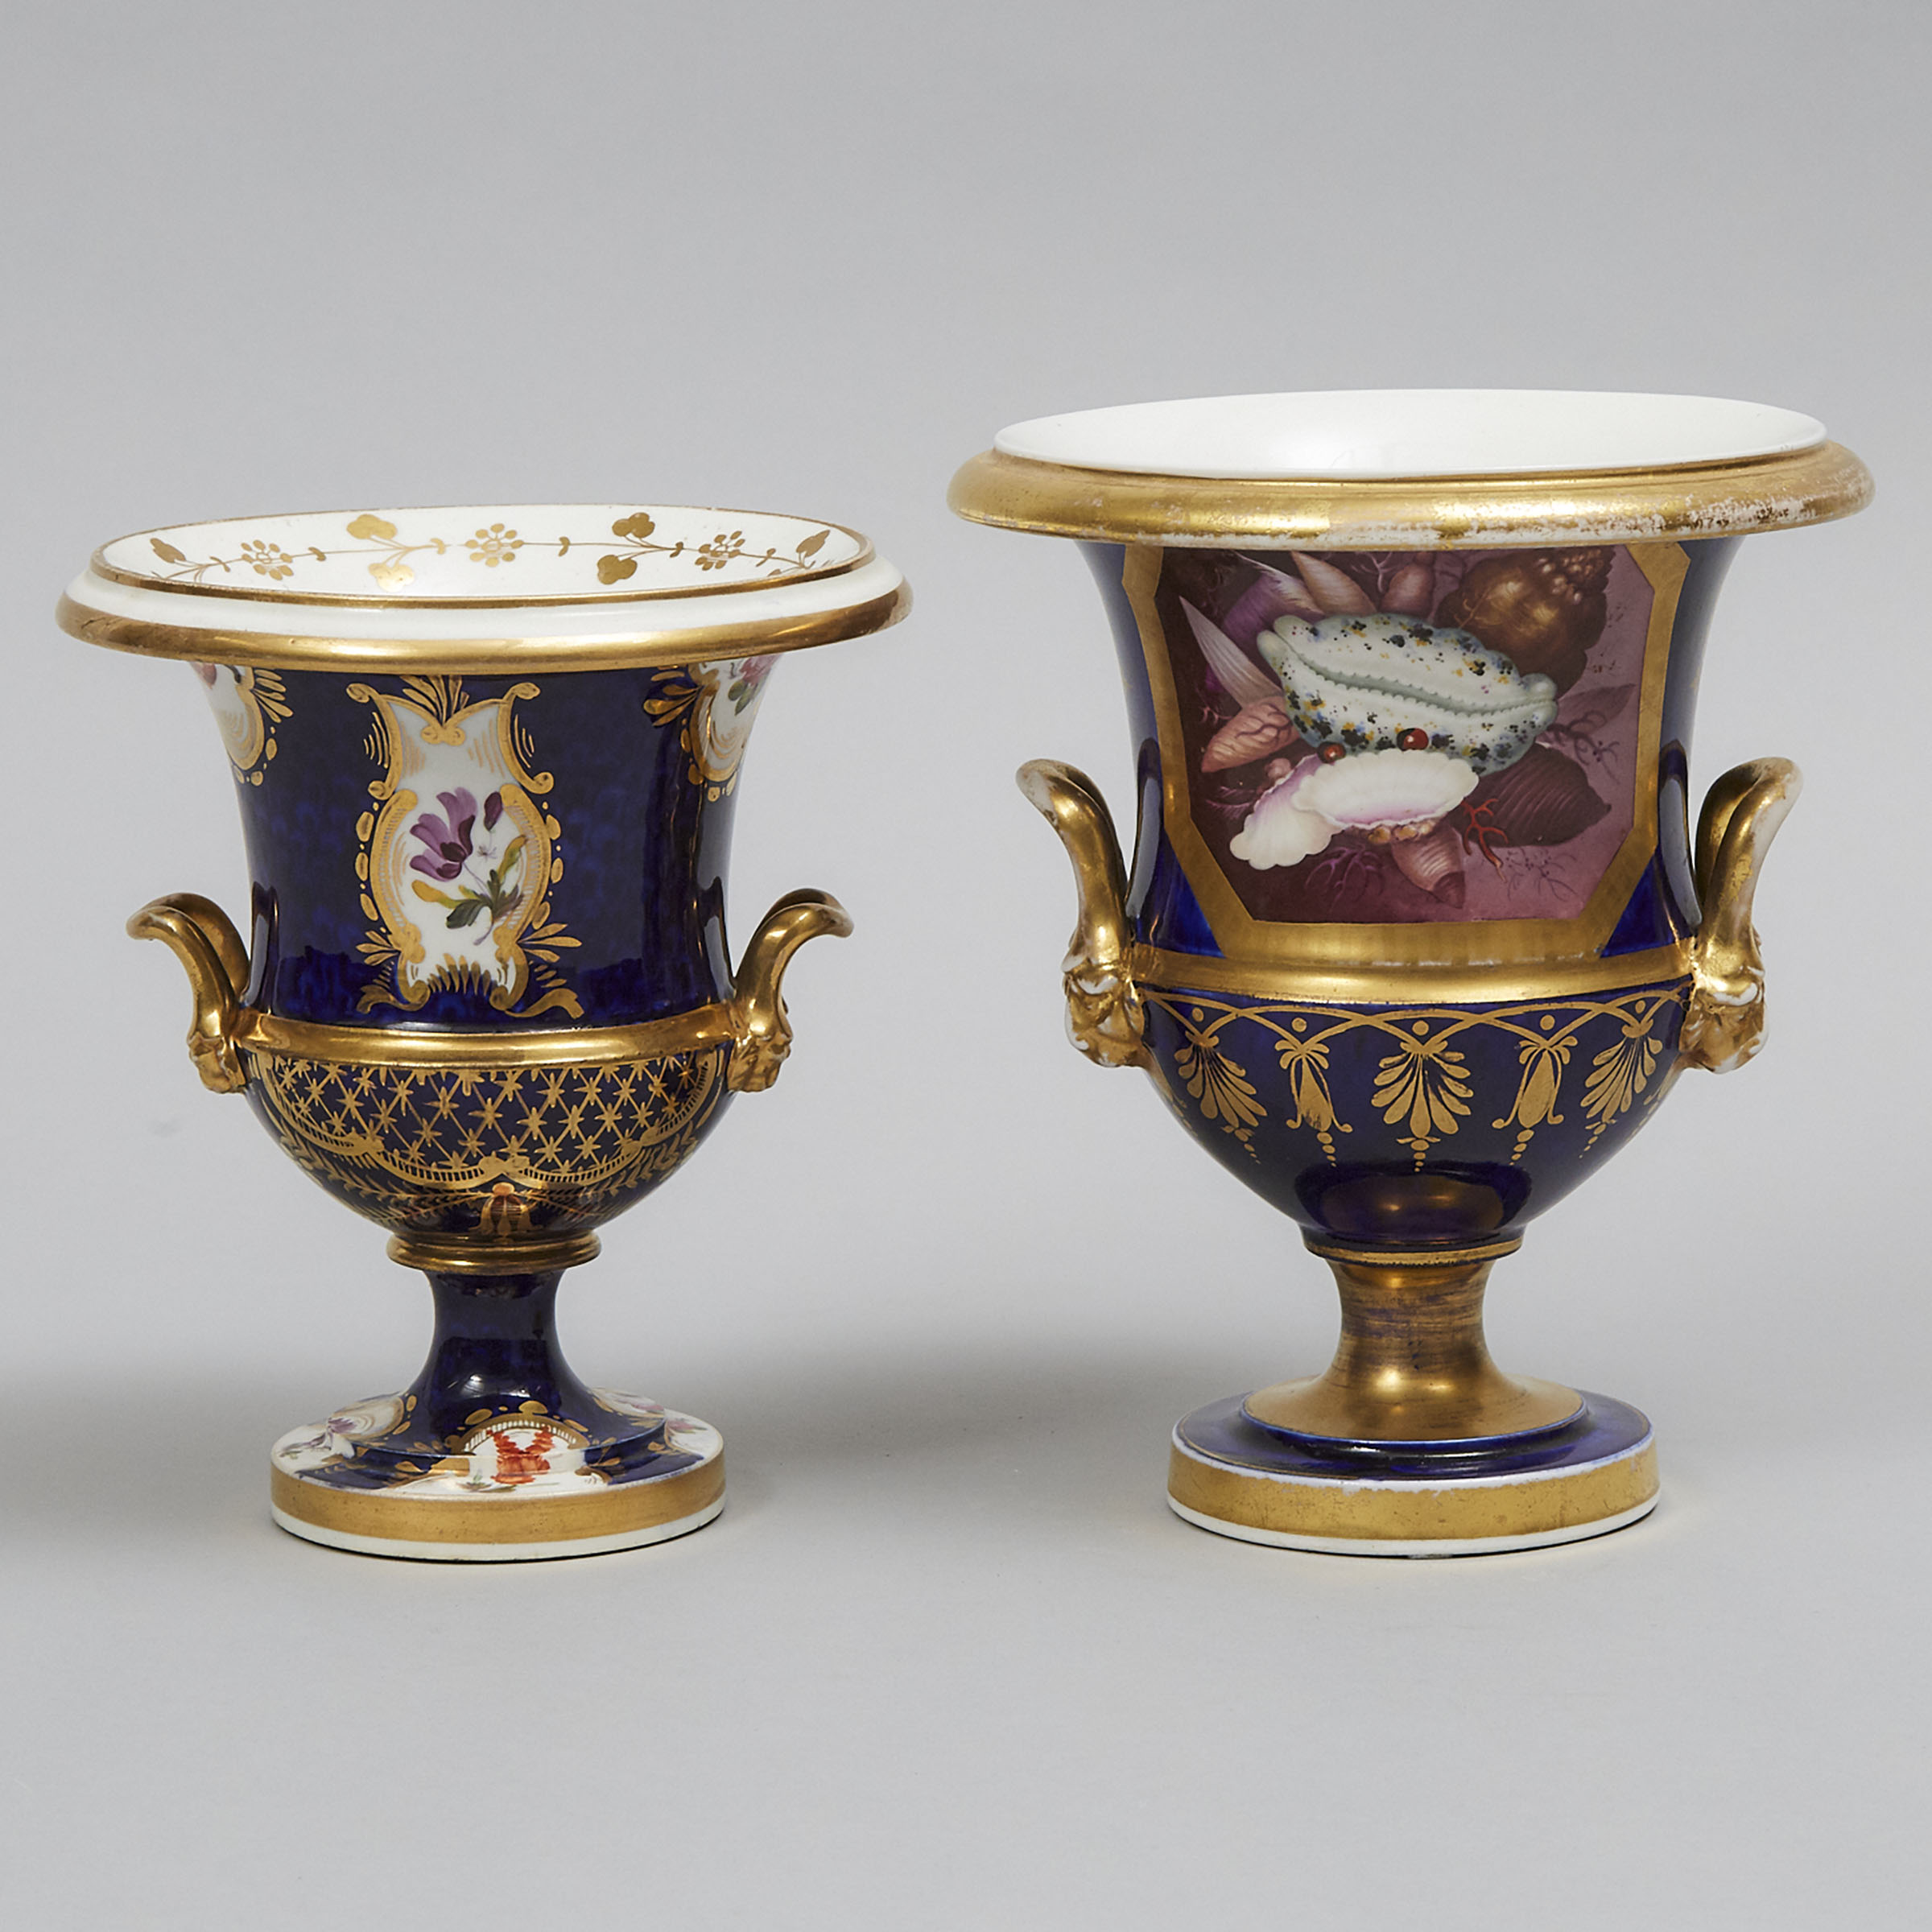 Two English Porcelain Blue Ground Vases, probably Coalport or Worcester, second quarter of the 19th century